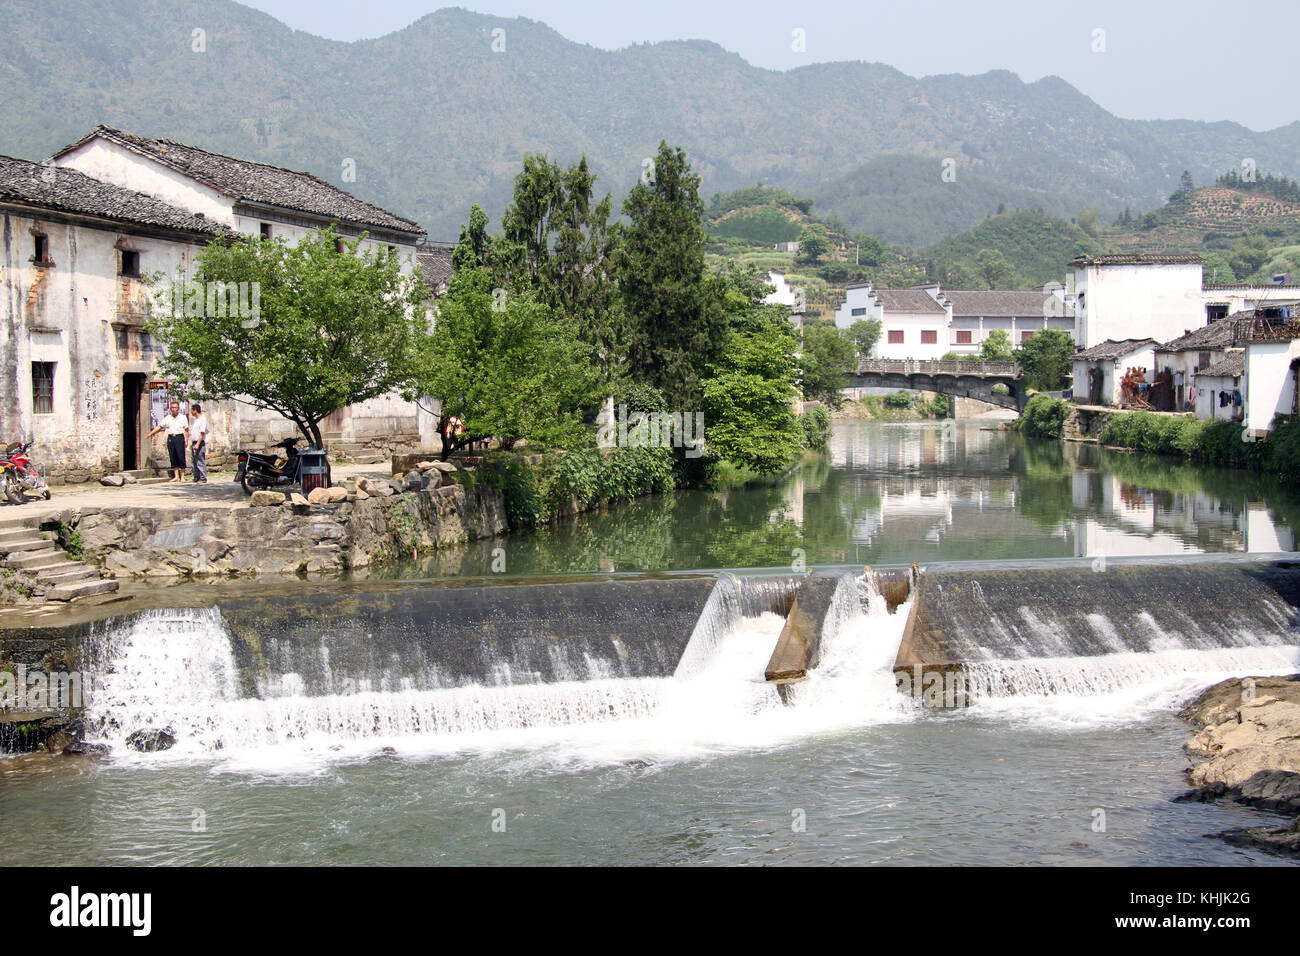 Dam, river and houses in Shexian town, China Stock Photo